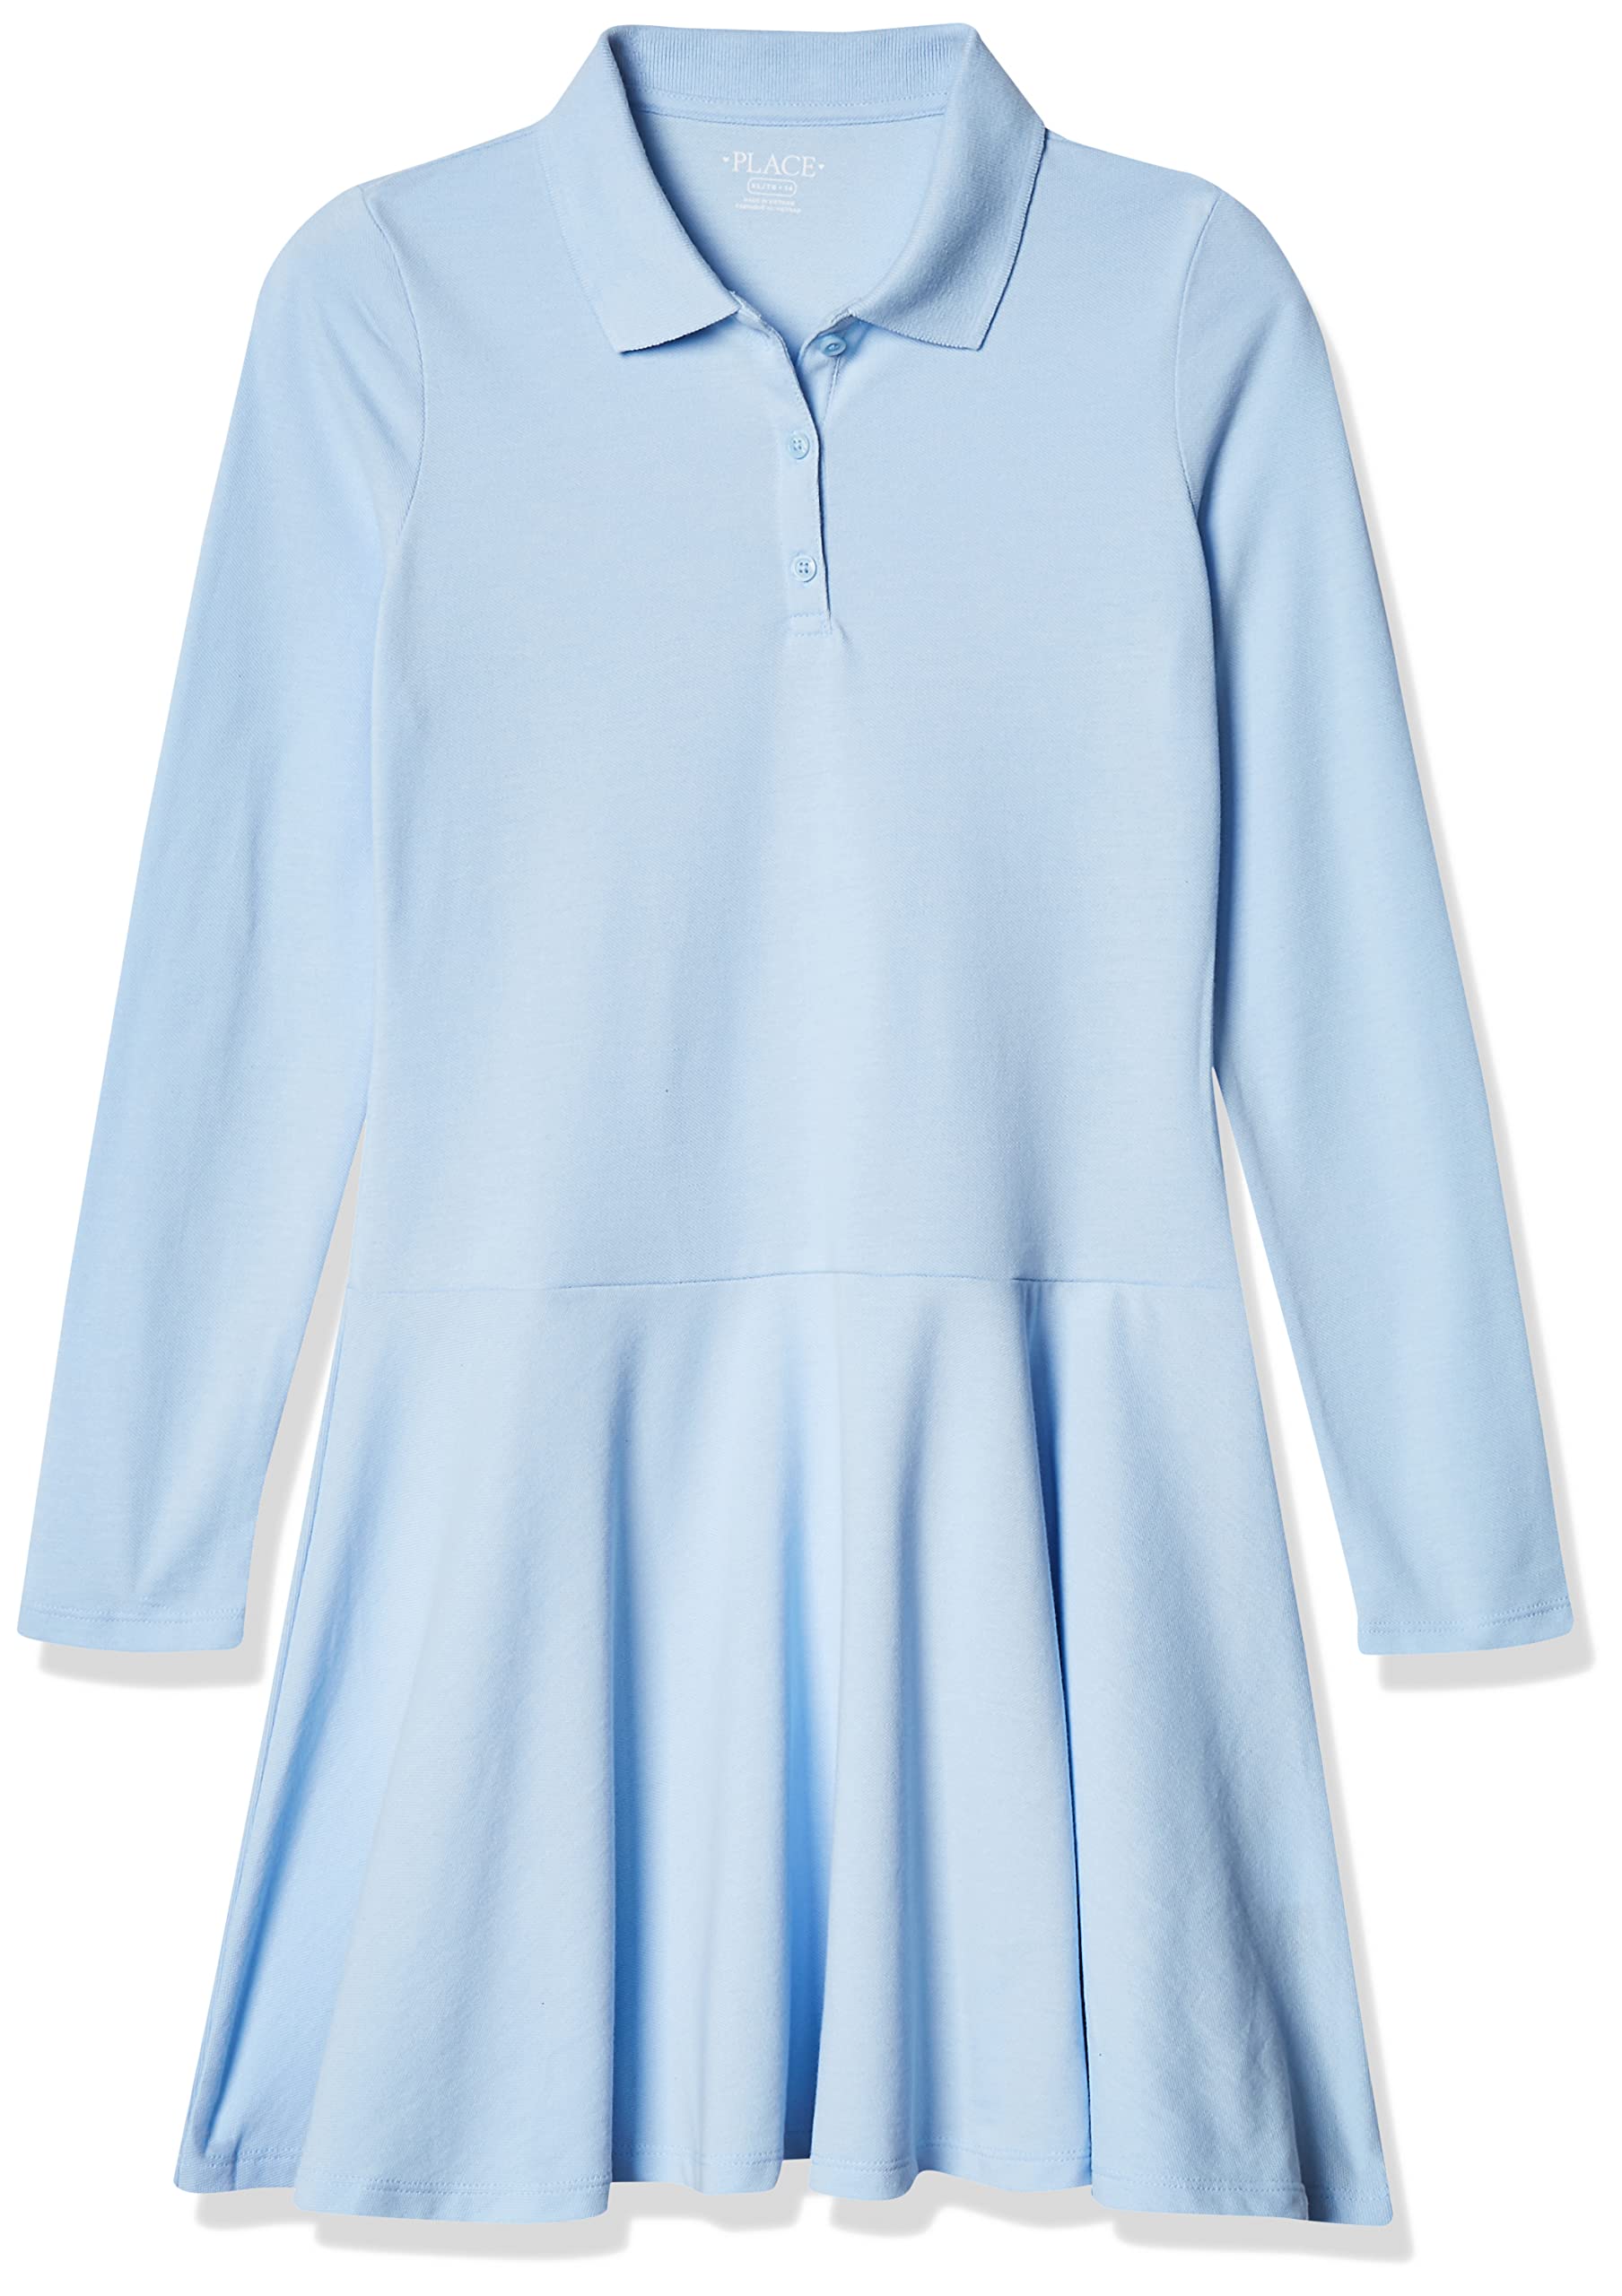 The Children's Place Big Girls' Long Sleeve Polo Dress